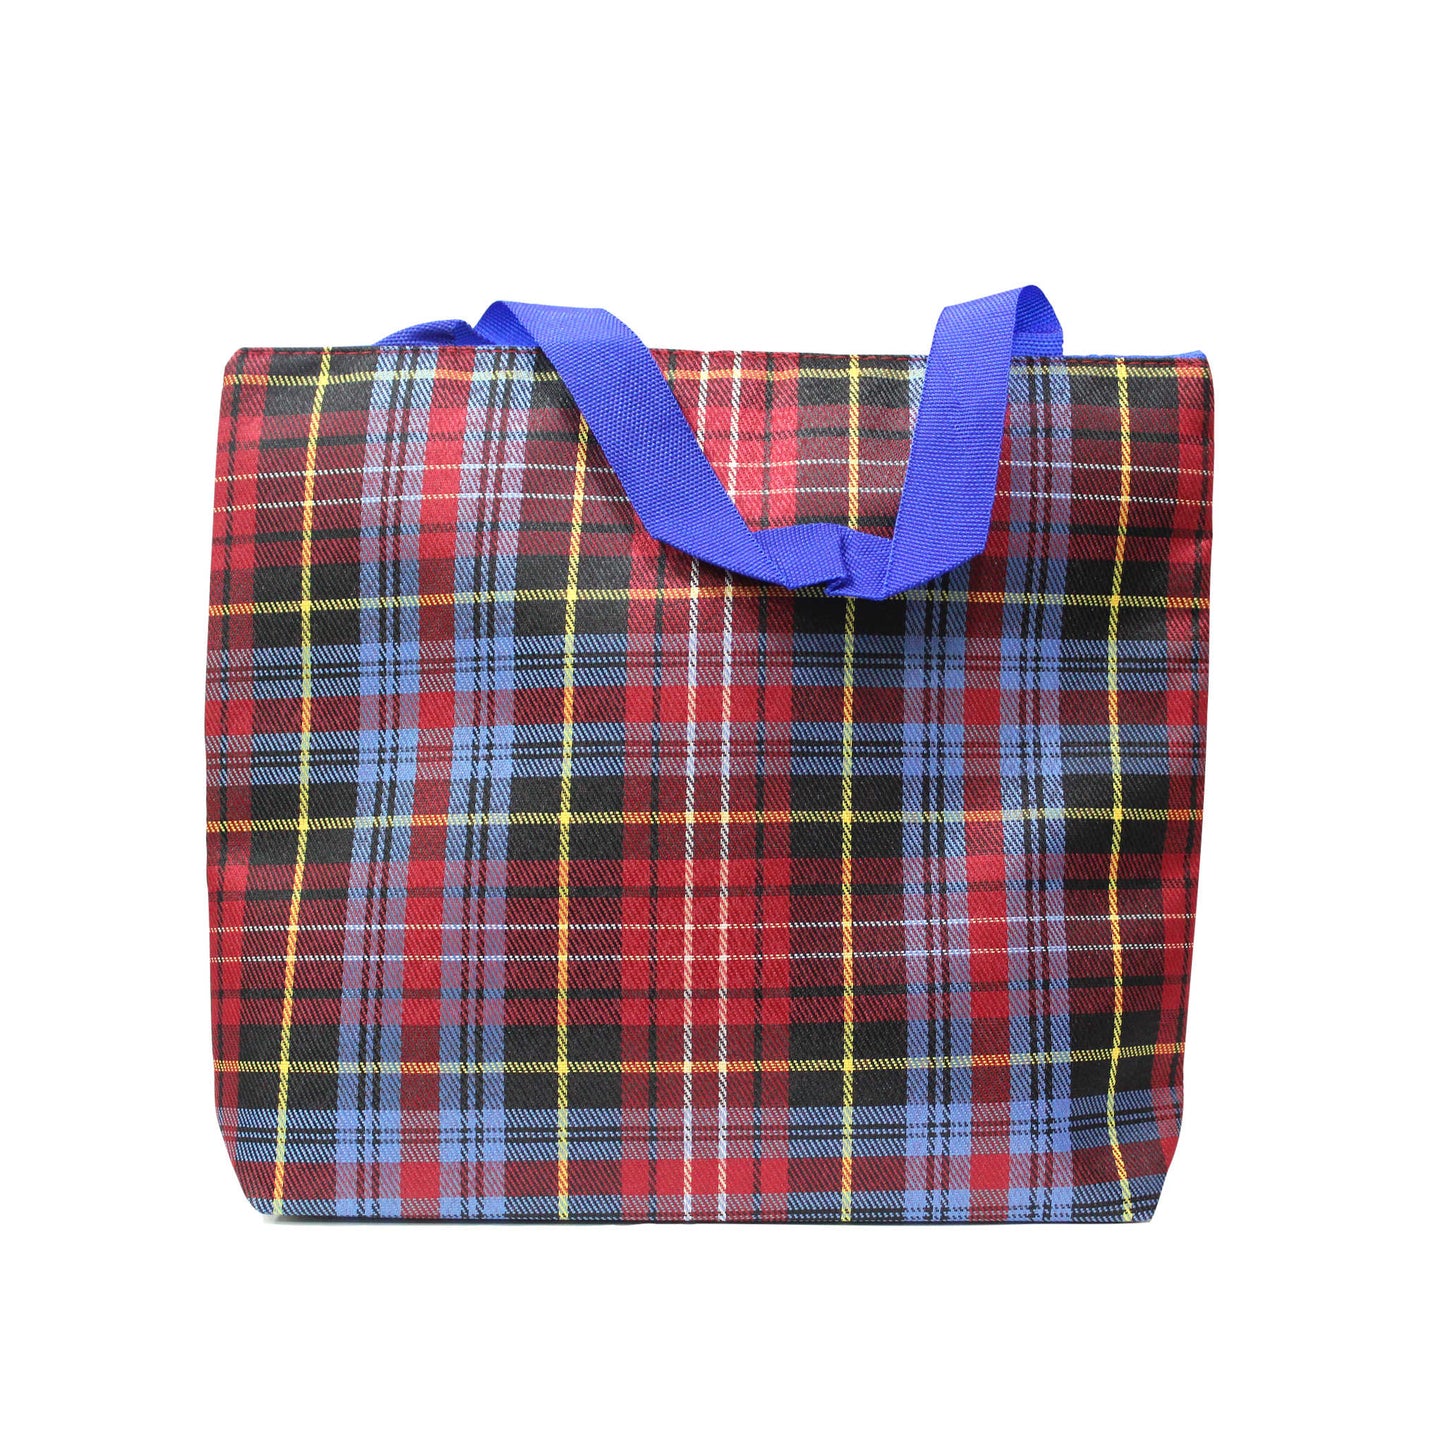 Indian Petals Imported Canvas Printed multi purpose Bag with handles for girls and ladies, Theme Traditional Scottish Checks, Large, Multi Blue